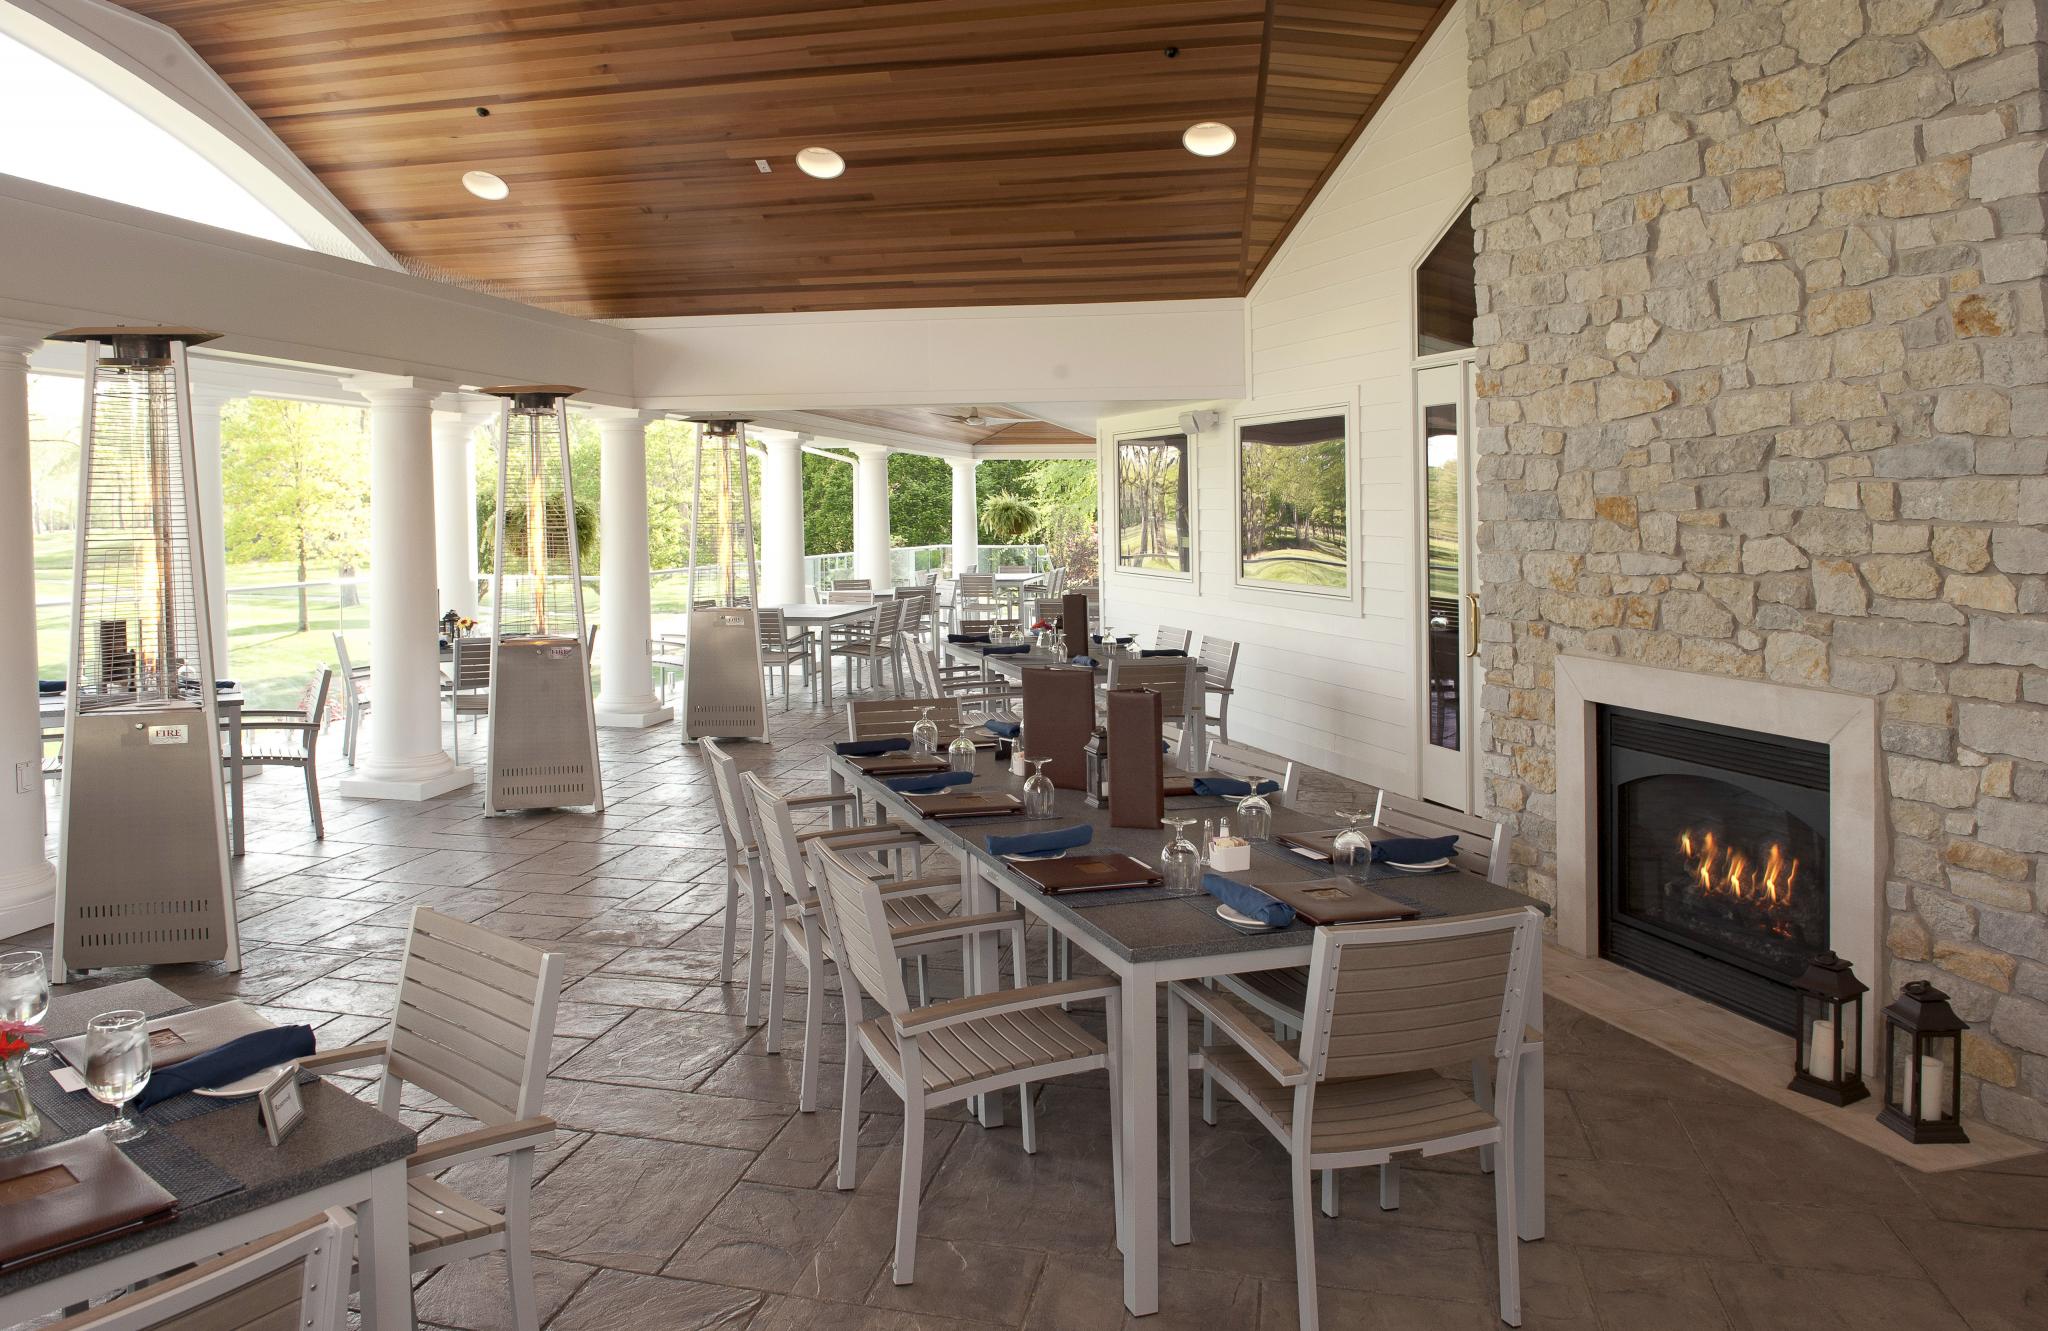 an image of an outdoor patio